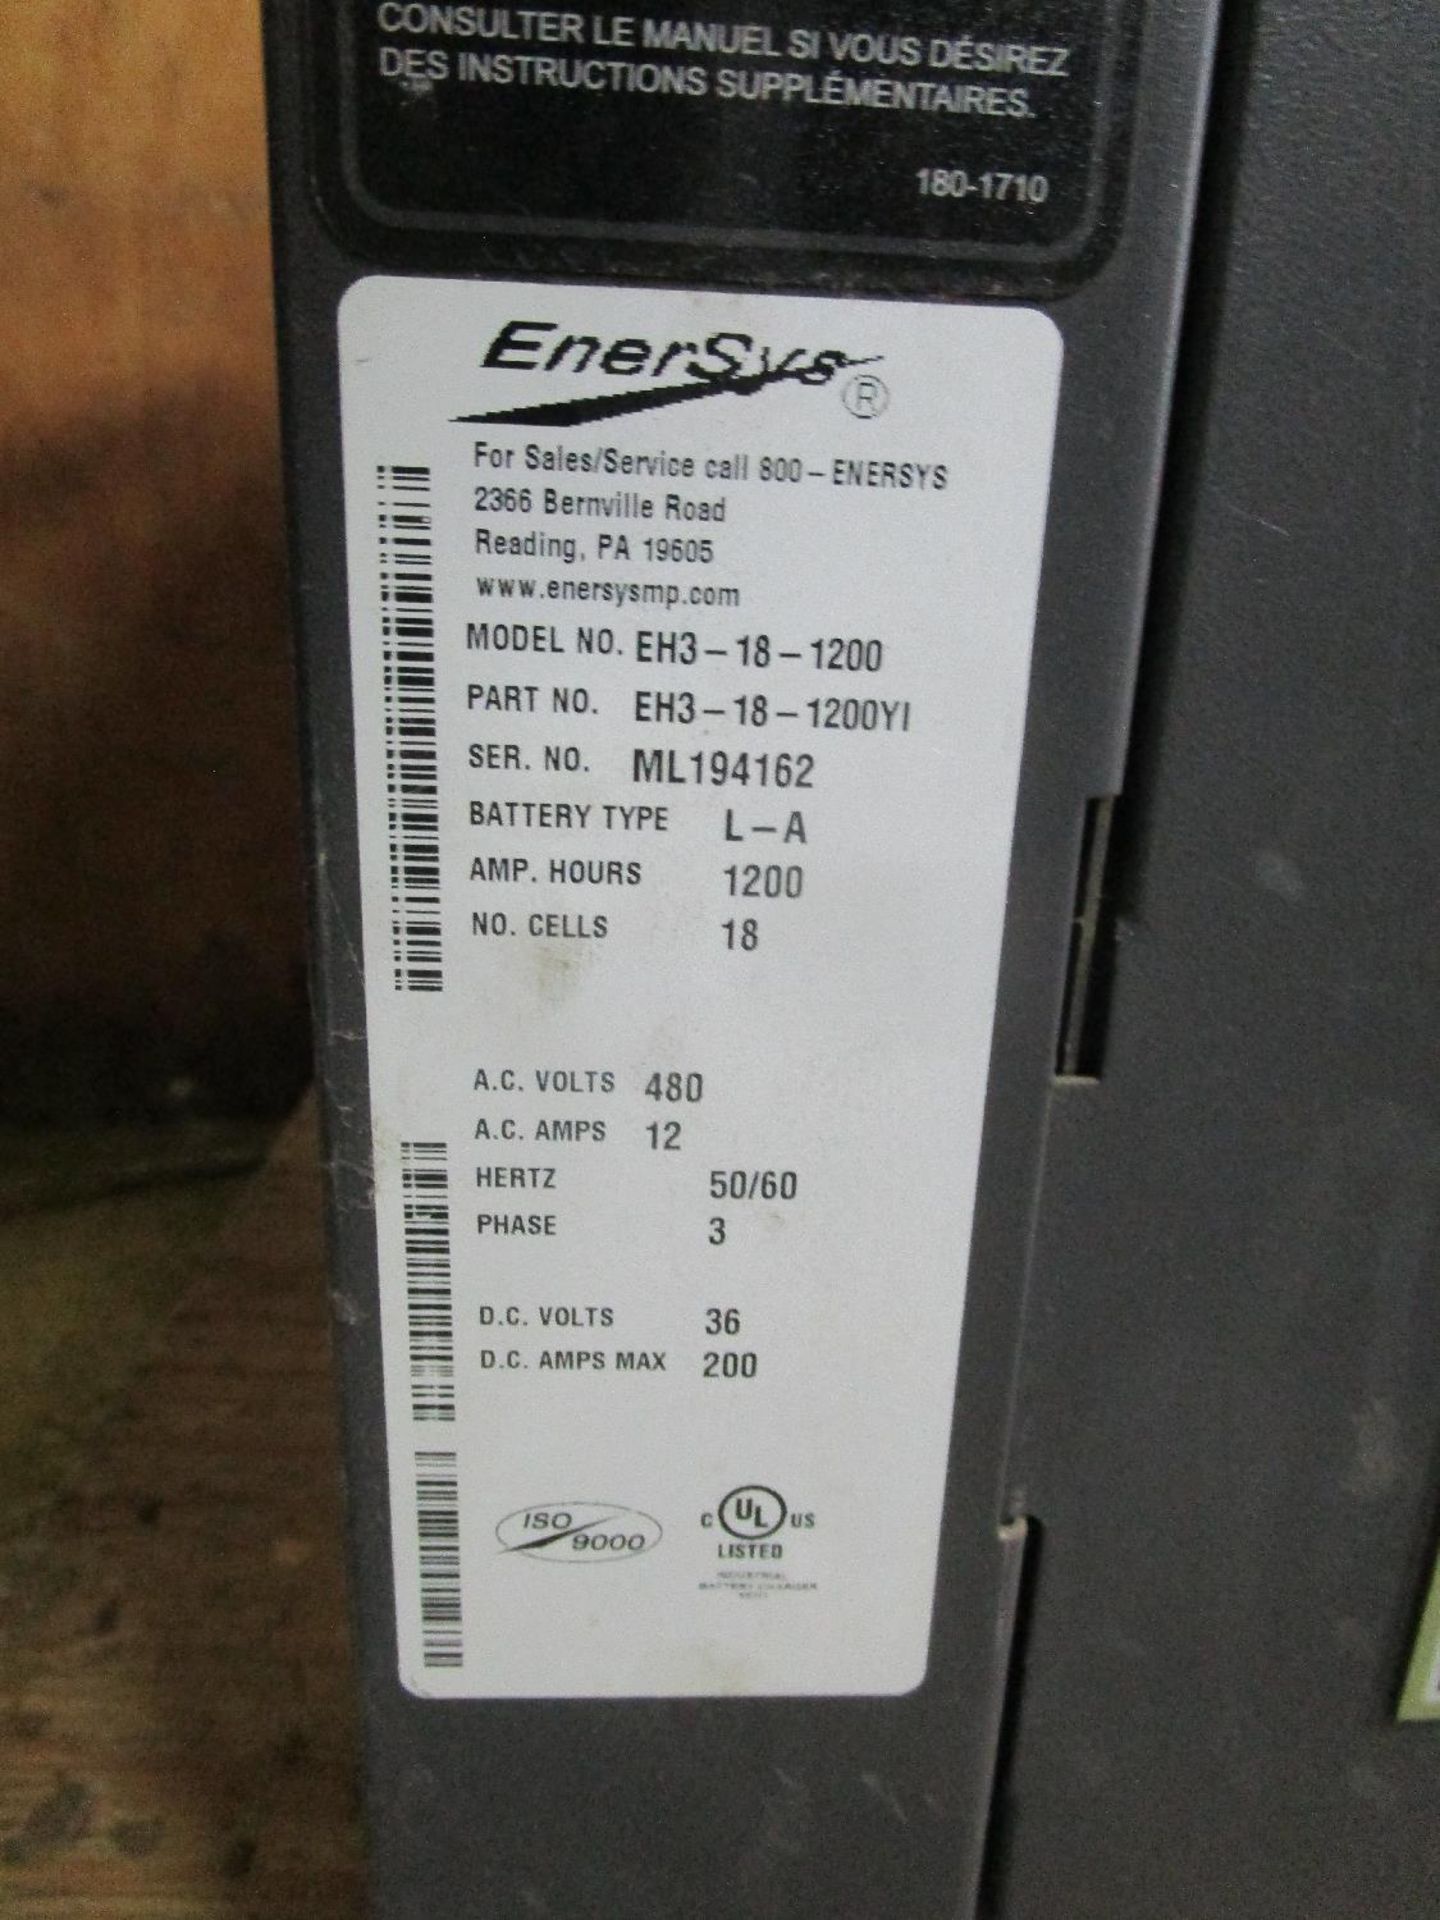 Enersys EH3-18-1200 36-Volt Battery Charger - Image 2 of 3